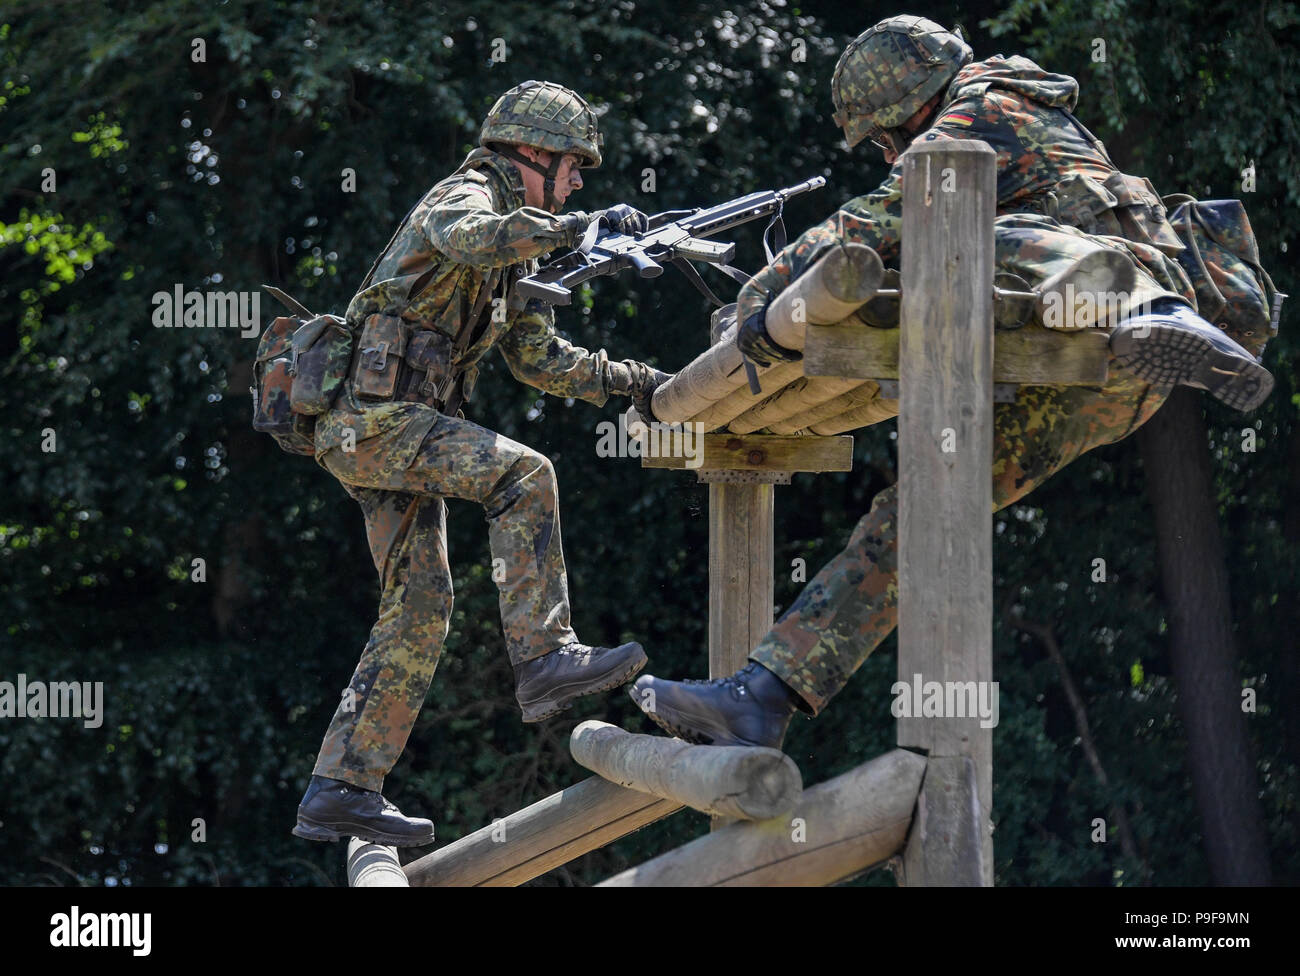 Hagenow, Germany. 18th July, 2018. Soldiers from the Panzergrenadier batallion 401 taking part in combat training. The German armed forces wants to enhance physical performance with a new basic training. The inspector of the army, Lieutenant General Vollmer, presented a pilot project and offered an insight into the concept of the new training at different stations. Credit: Axel Heimken/dpa/Alamy Live News Stock Photo